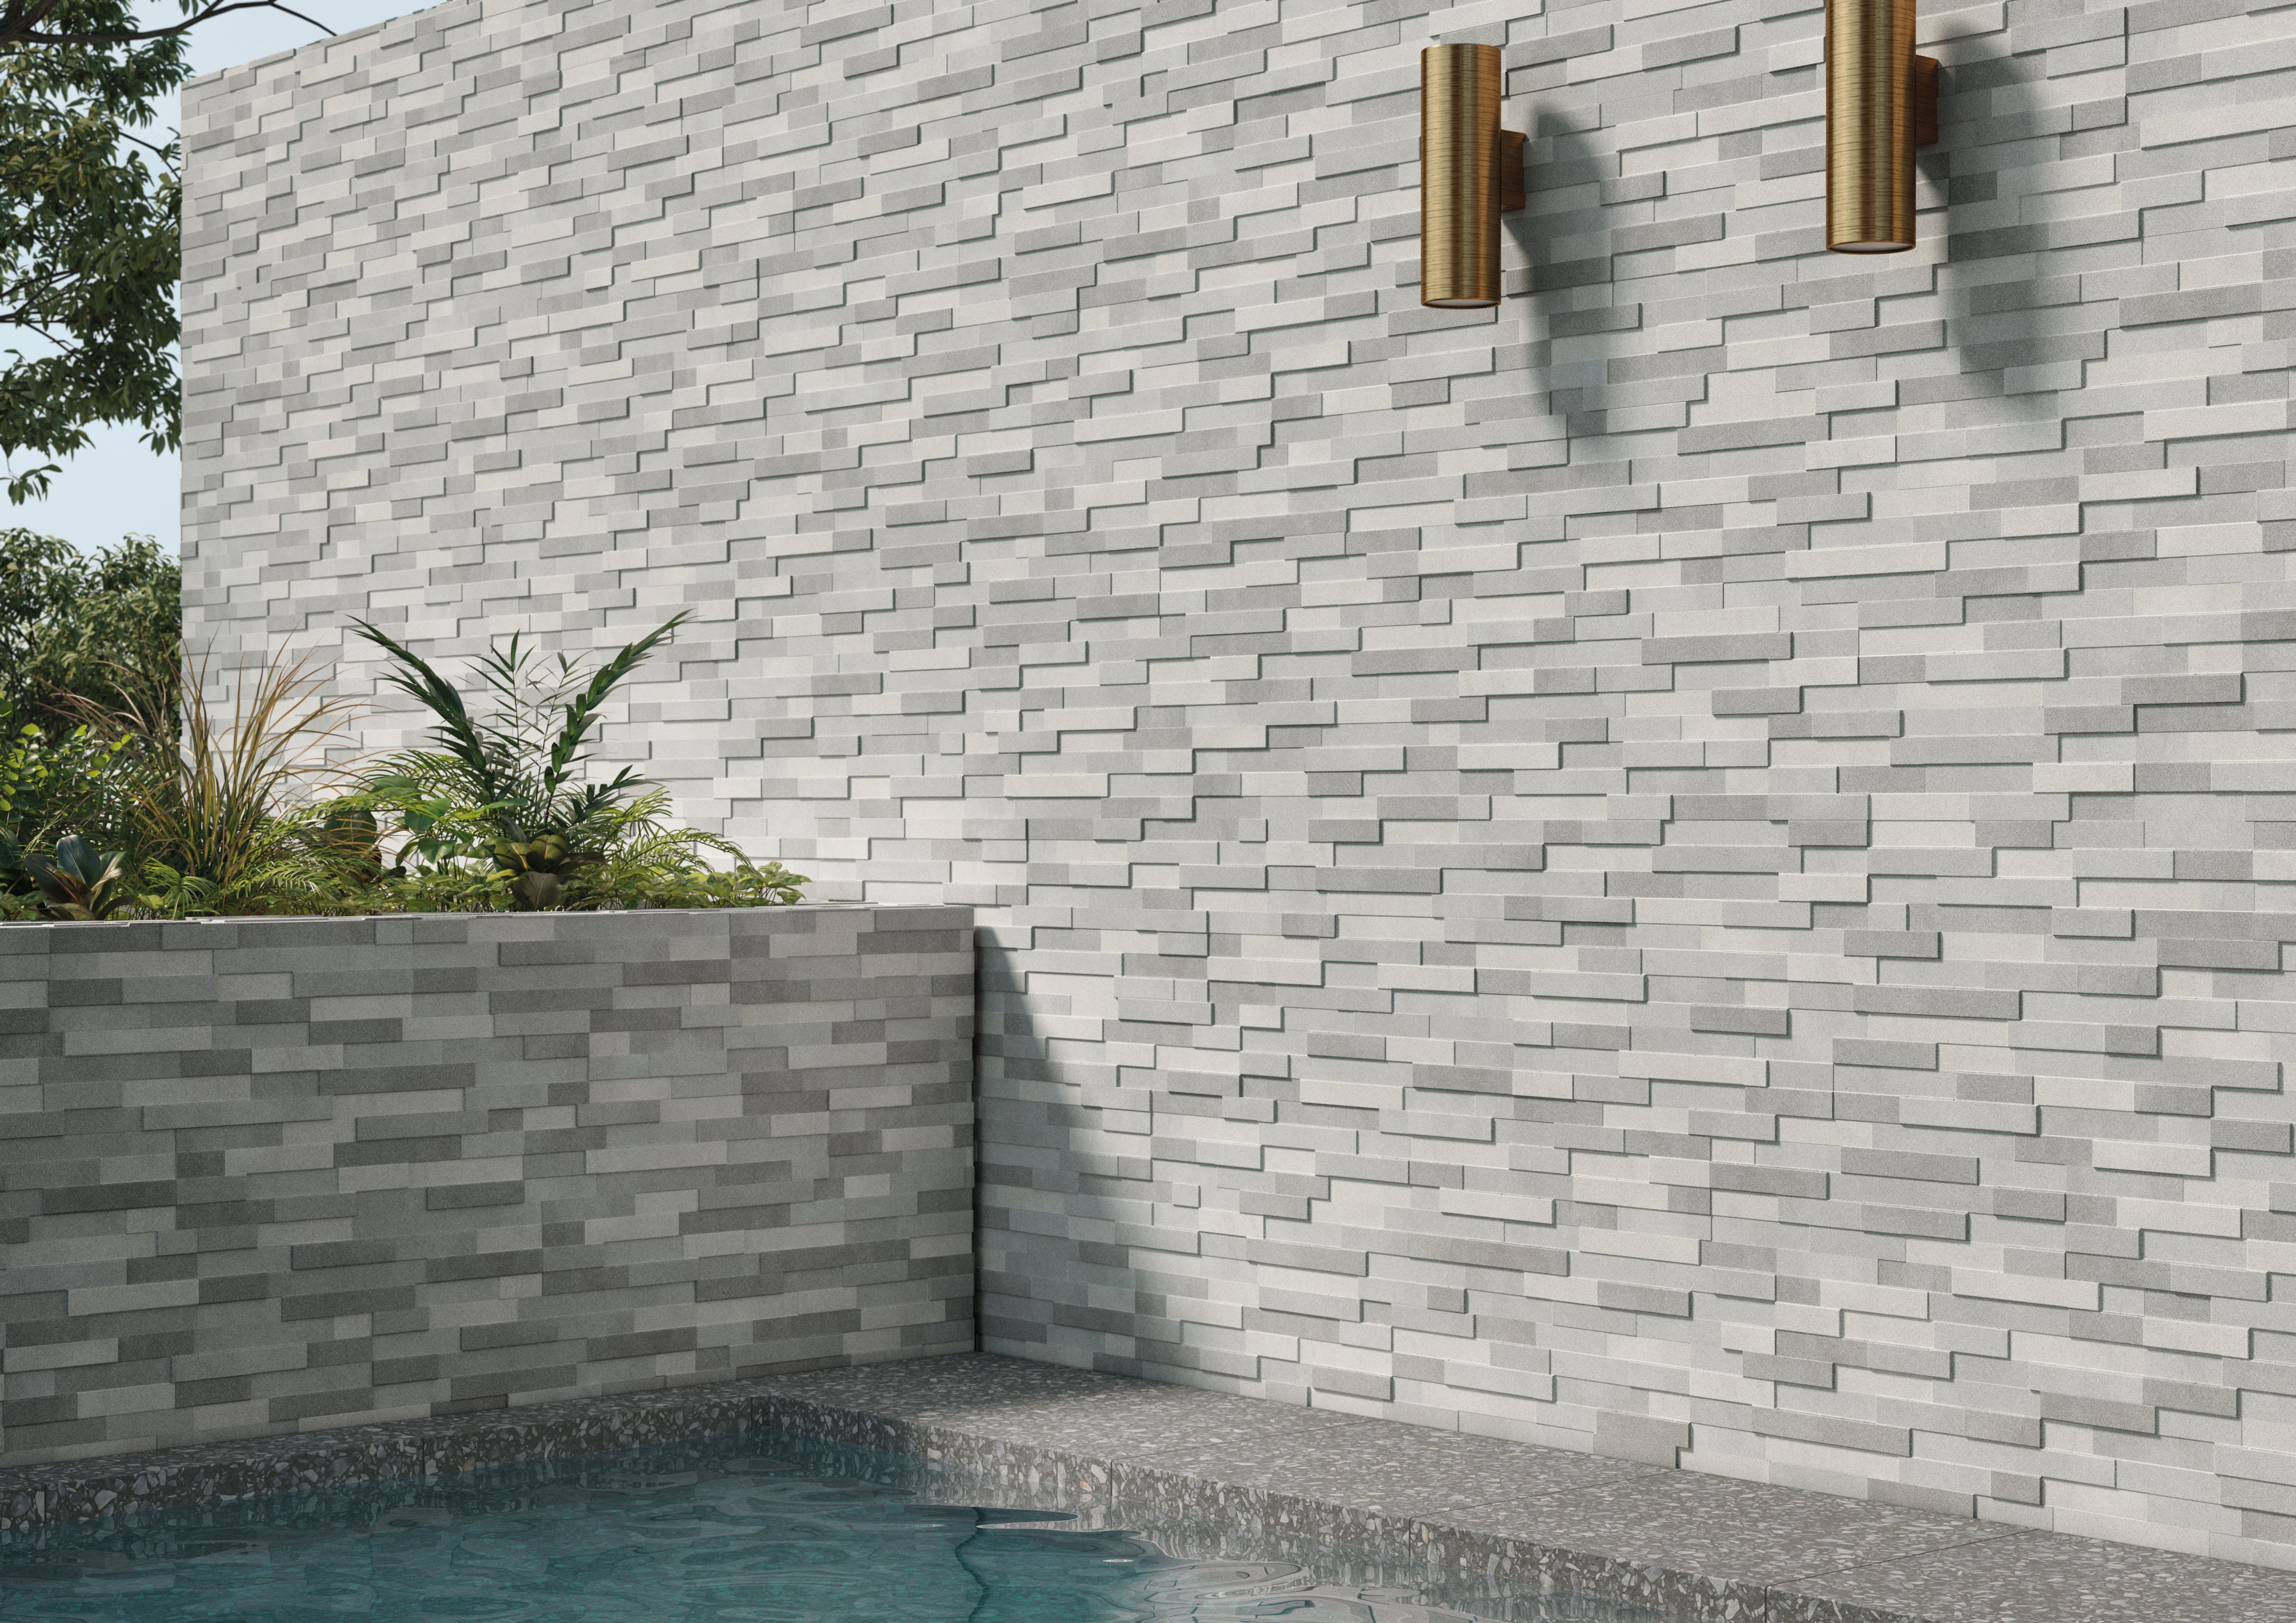 Porcelain tile collection from Surface Group featuring modern urban style in shades of gray for contemporary wall and pool design.